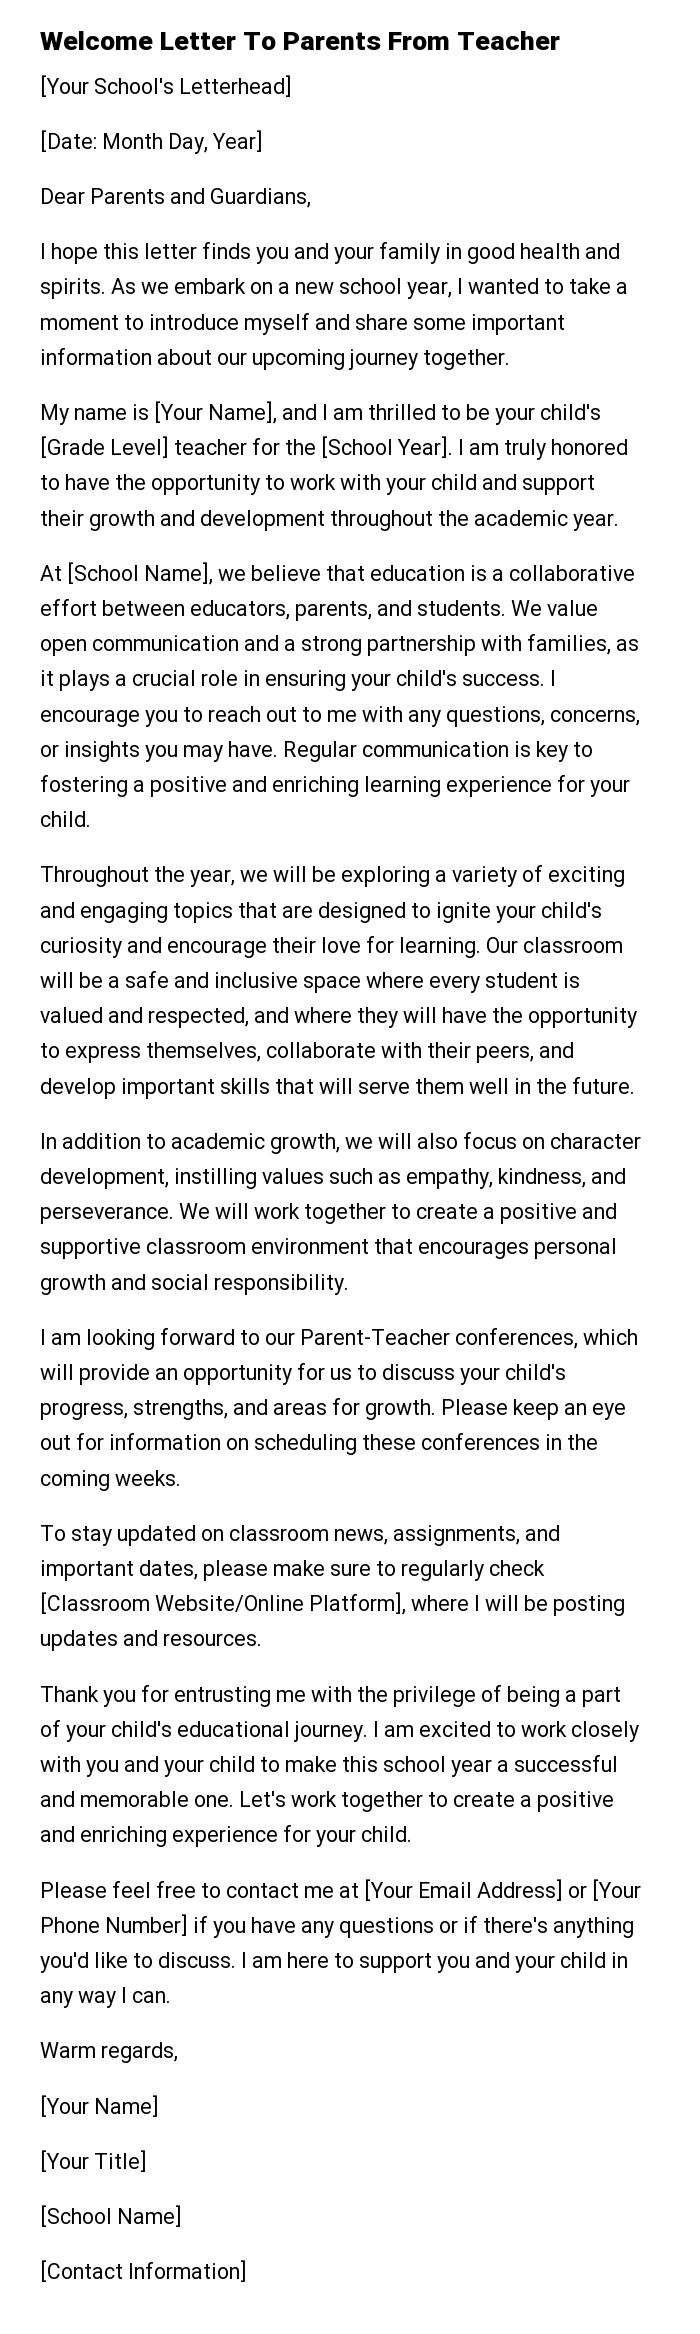 Welcome Letter To Parents From Teacher